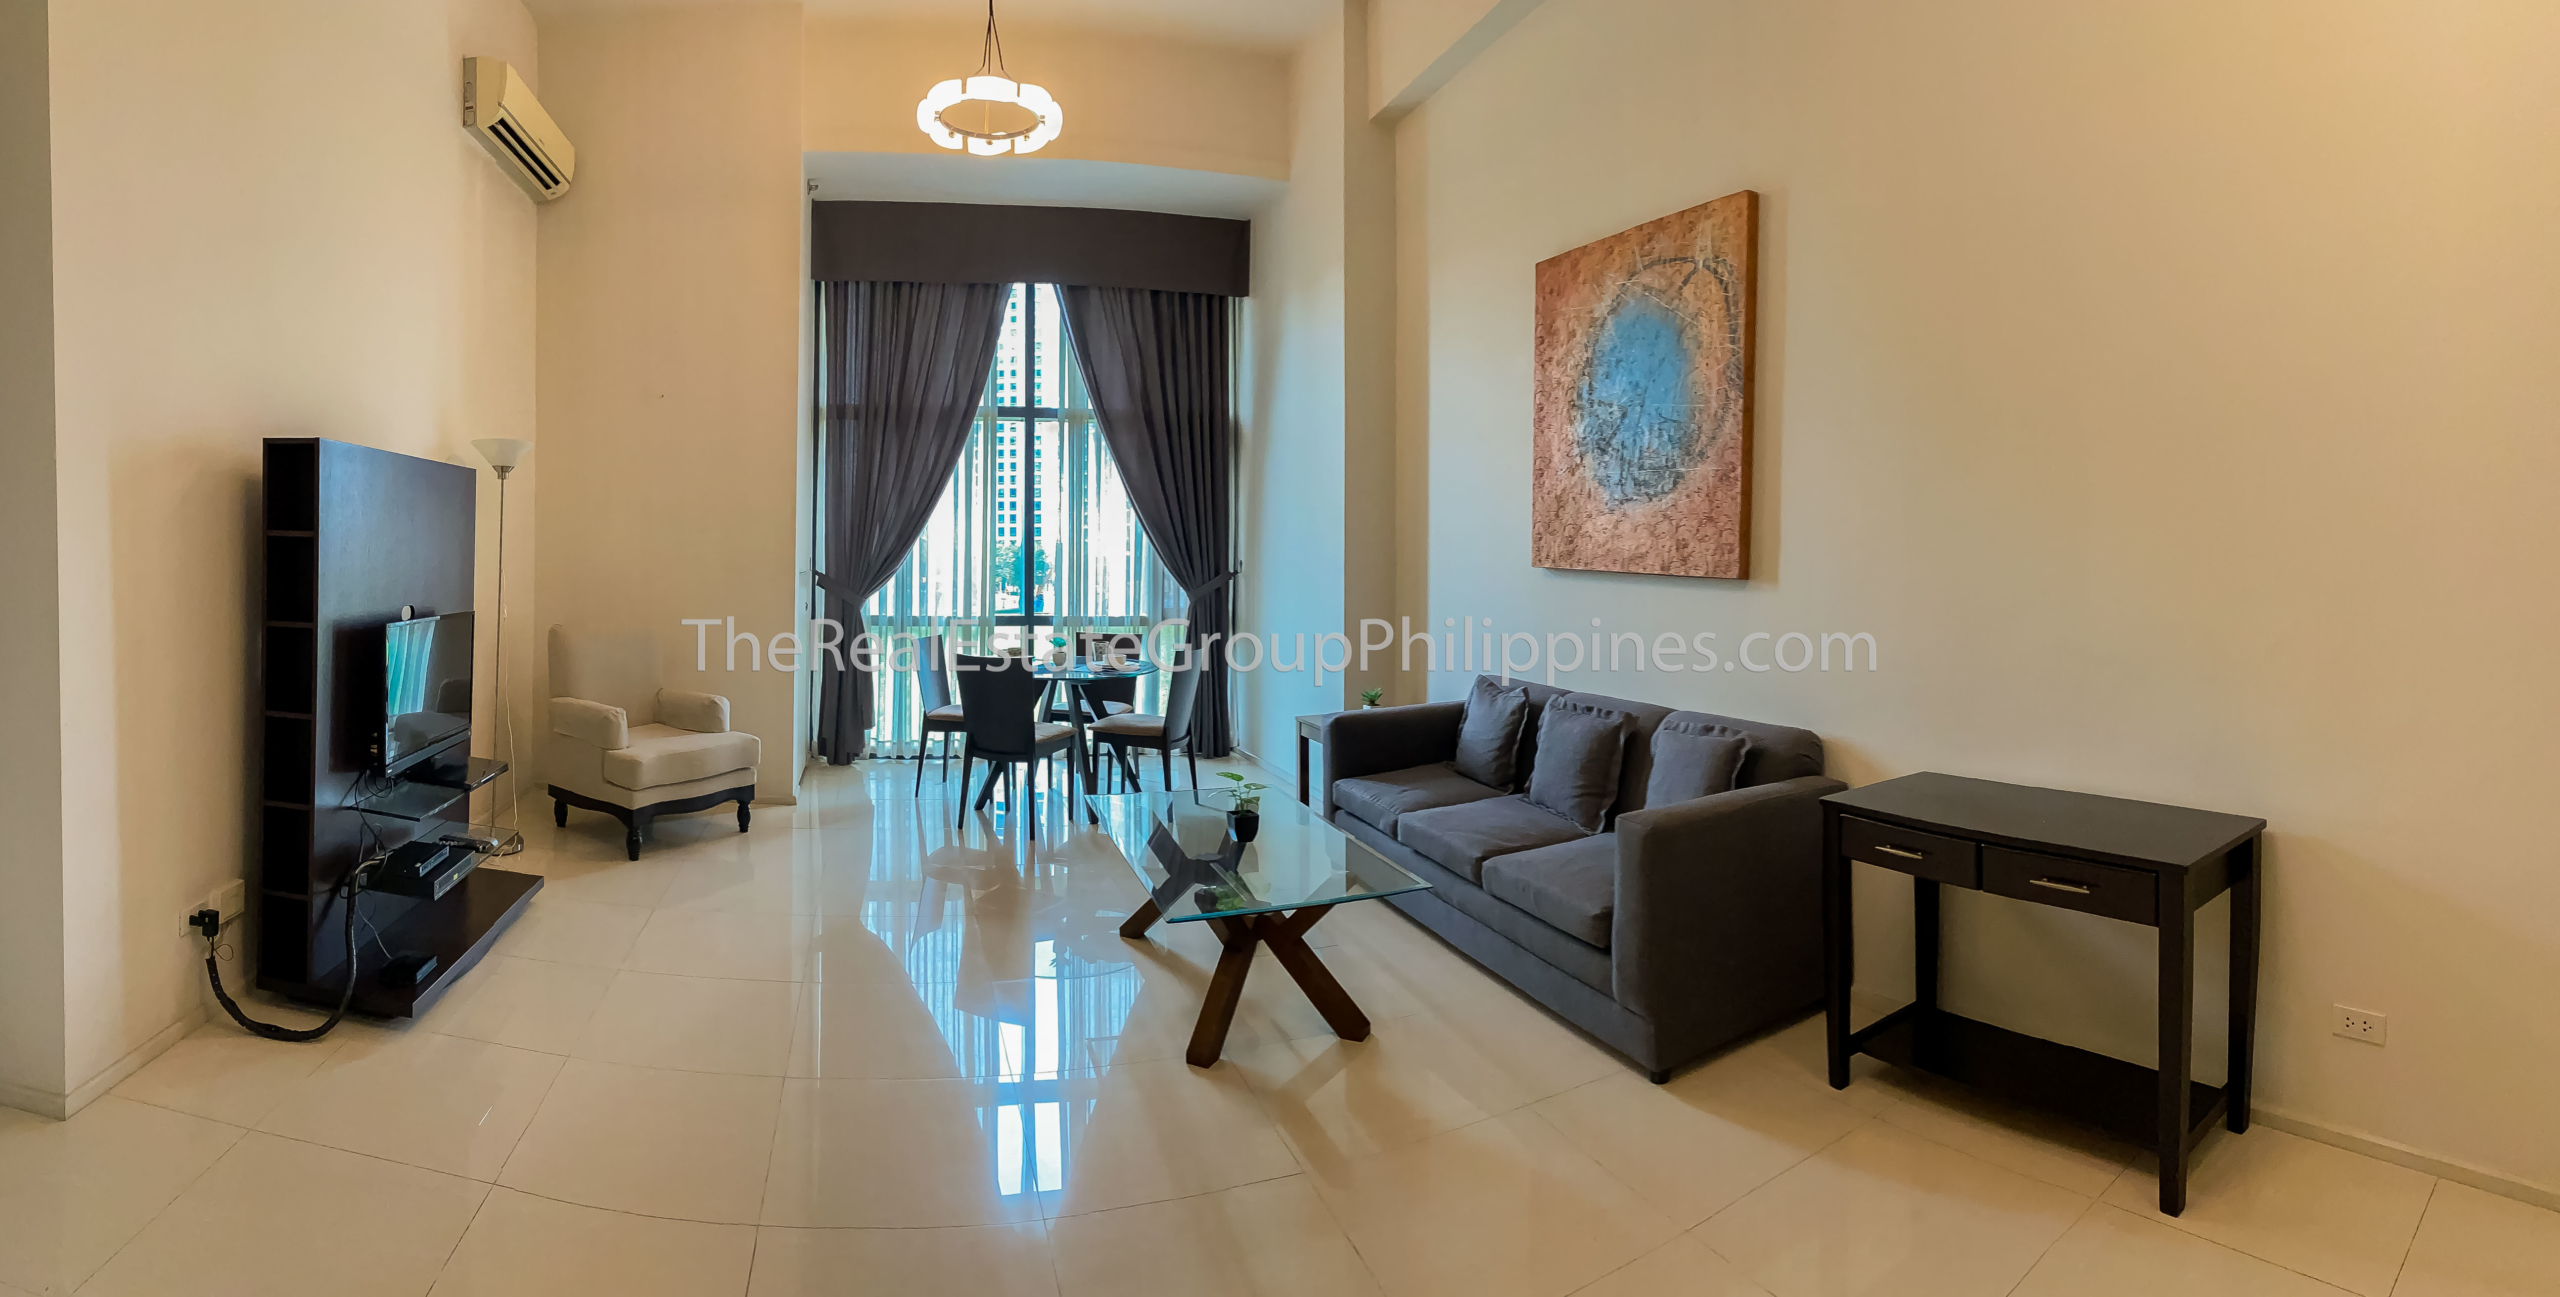 1BR Condo For Rent, Arya Residences, Tower 1, BGC - ₱75K Per Month-8